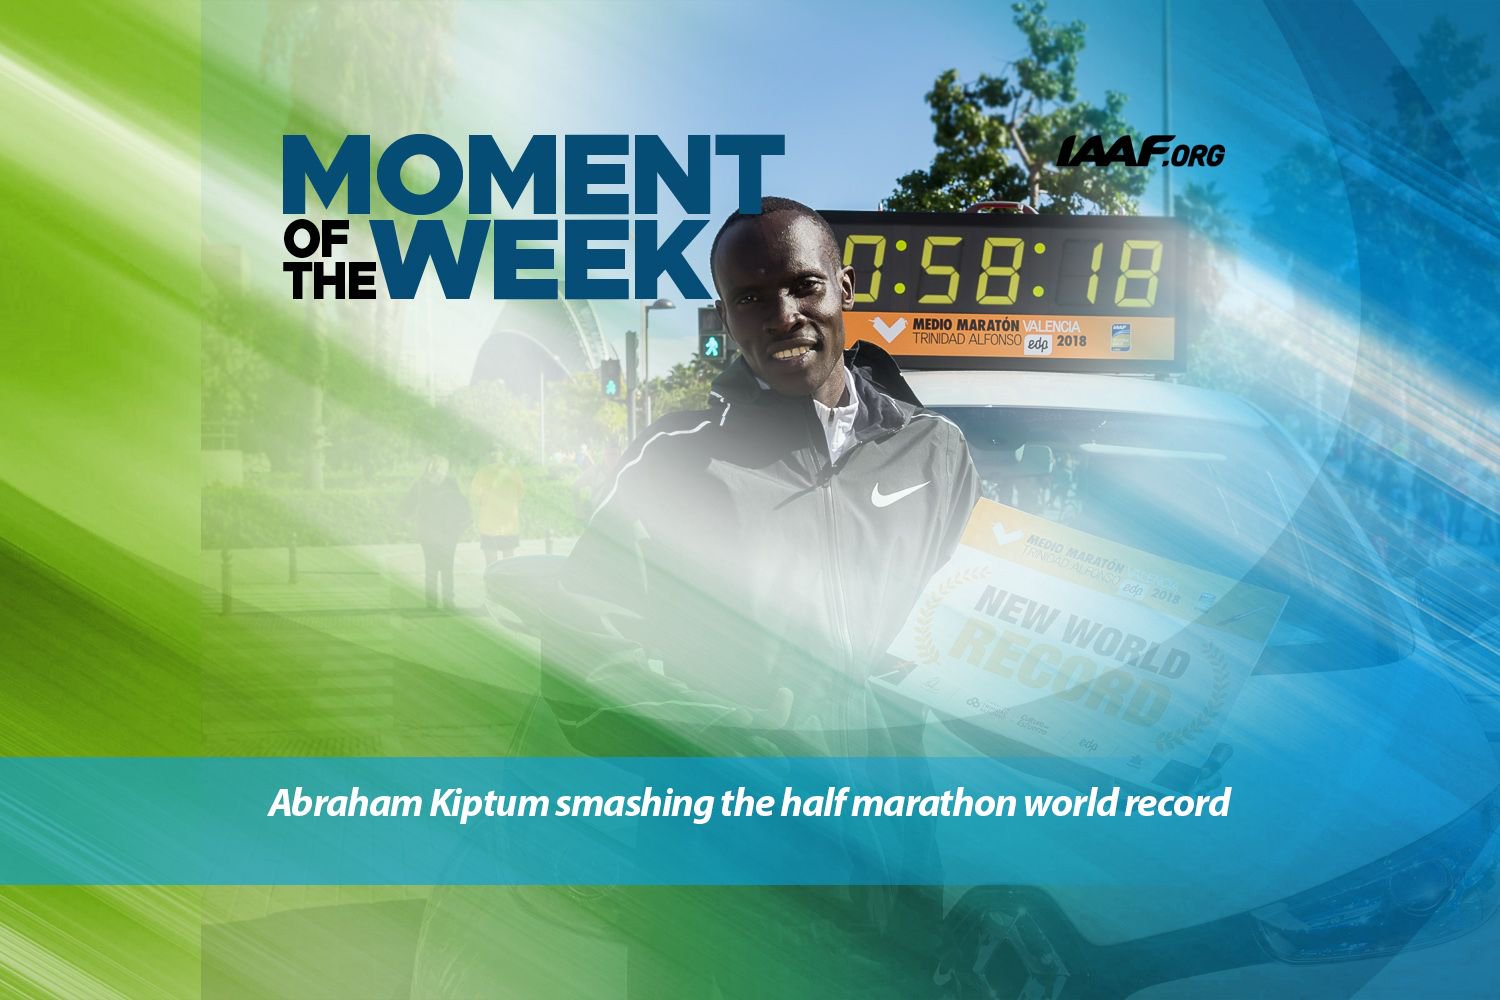 Kenya's Abraham Kiptum banned for doping; his world record squashed